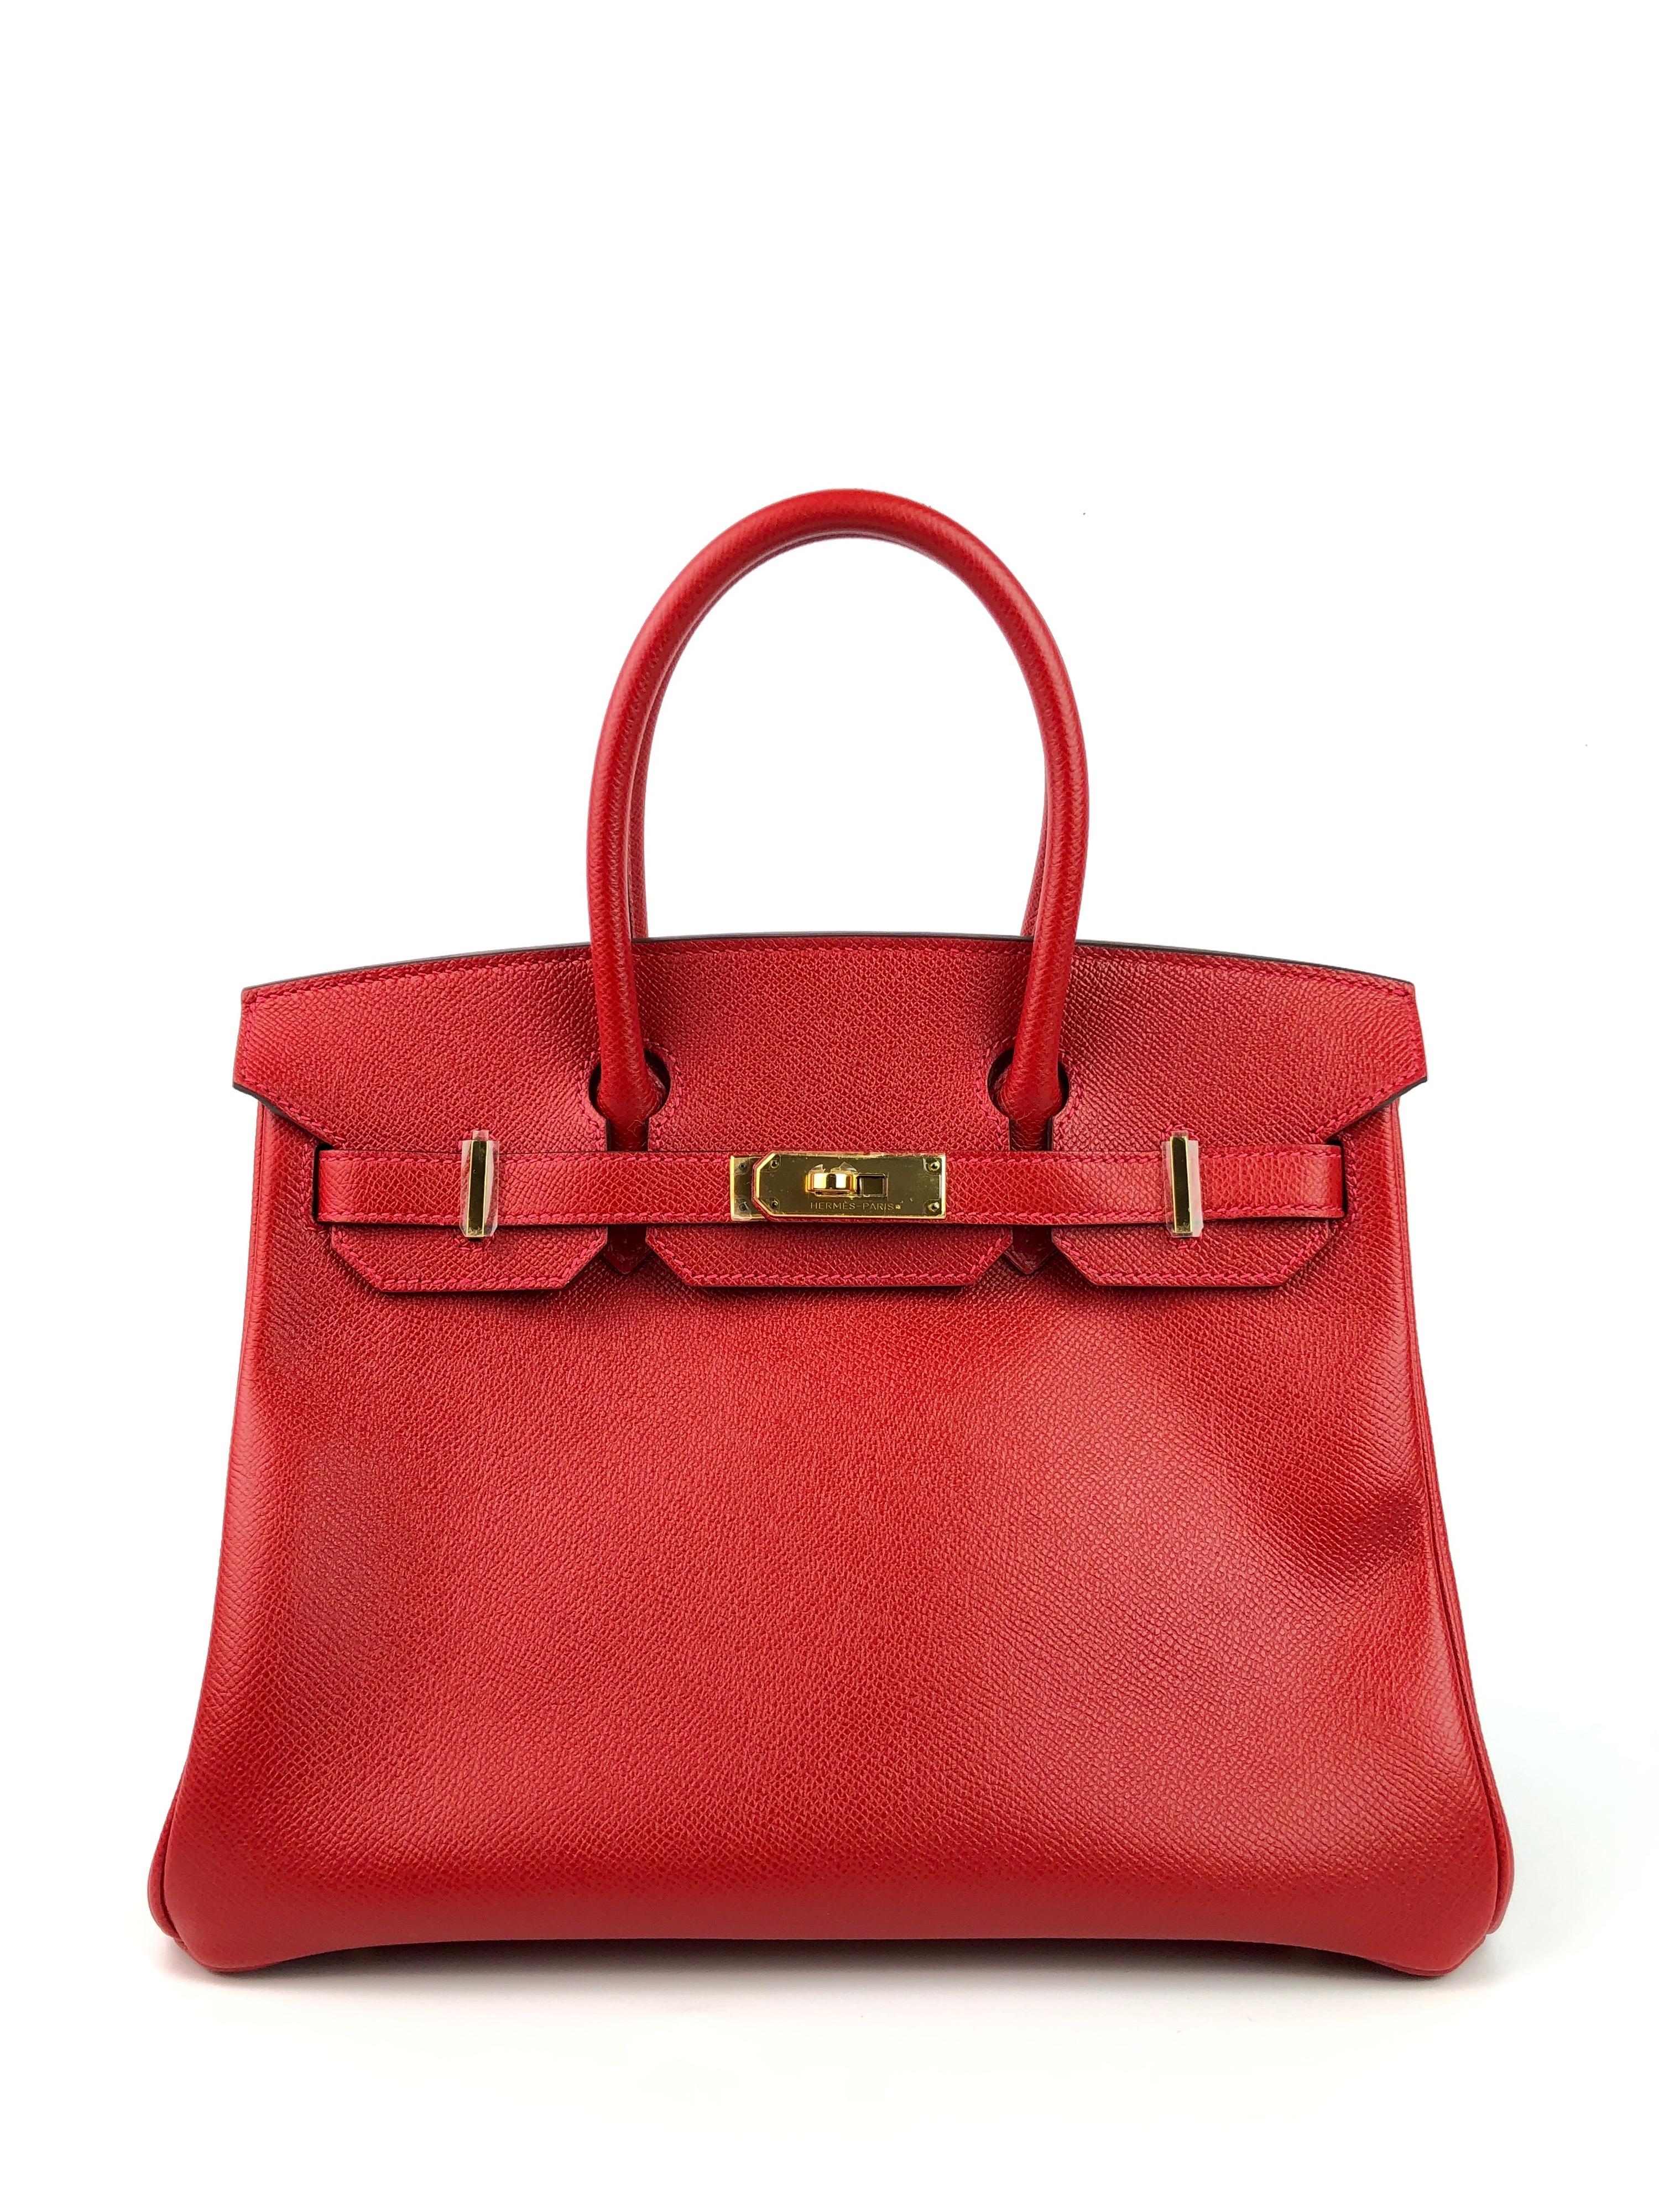 Hermes Birkin 30 Rouge Casaque Red Epsom Gold Hardware. As new from Collectors closet. All plastic still intact has been displayed and handled but never carried out. T Stamp 2015. 

Shop with Confidence from Lux Addicts. Authenticity Guaranteed! 